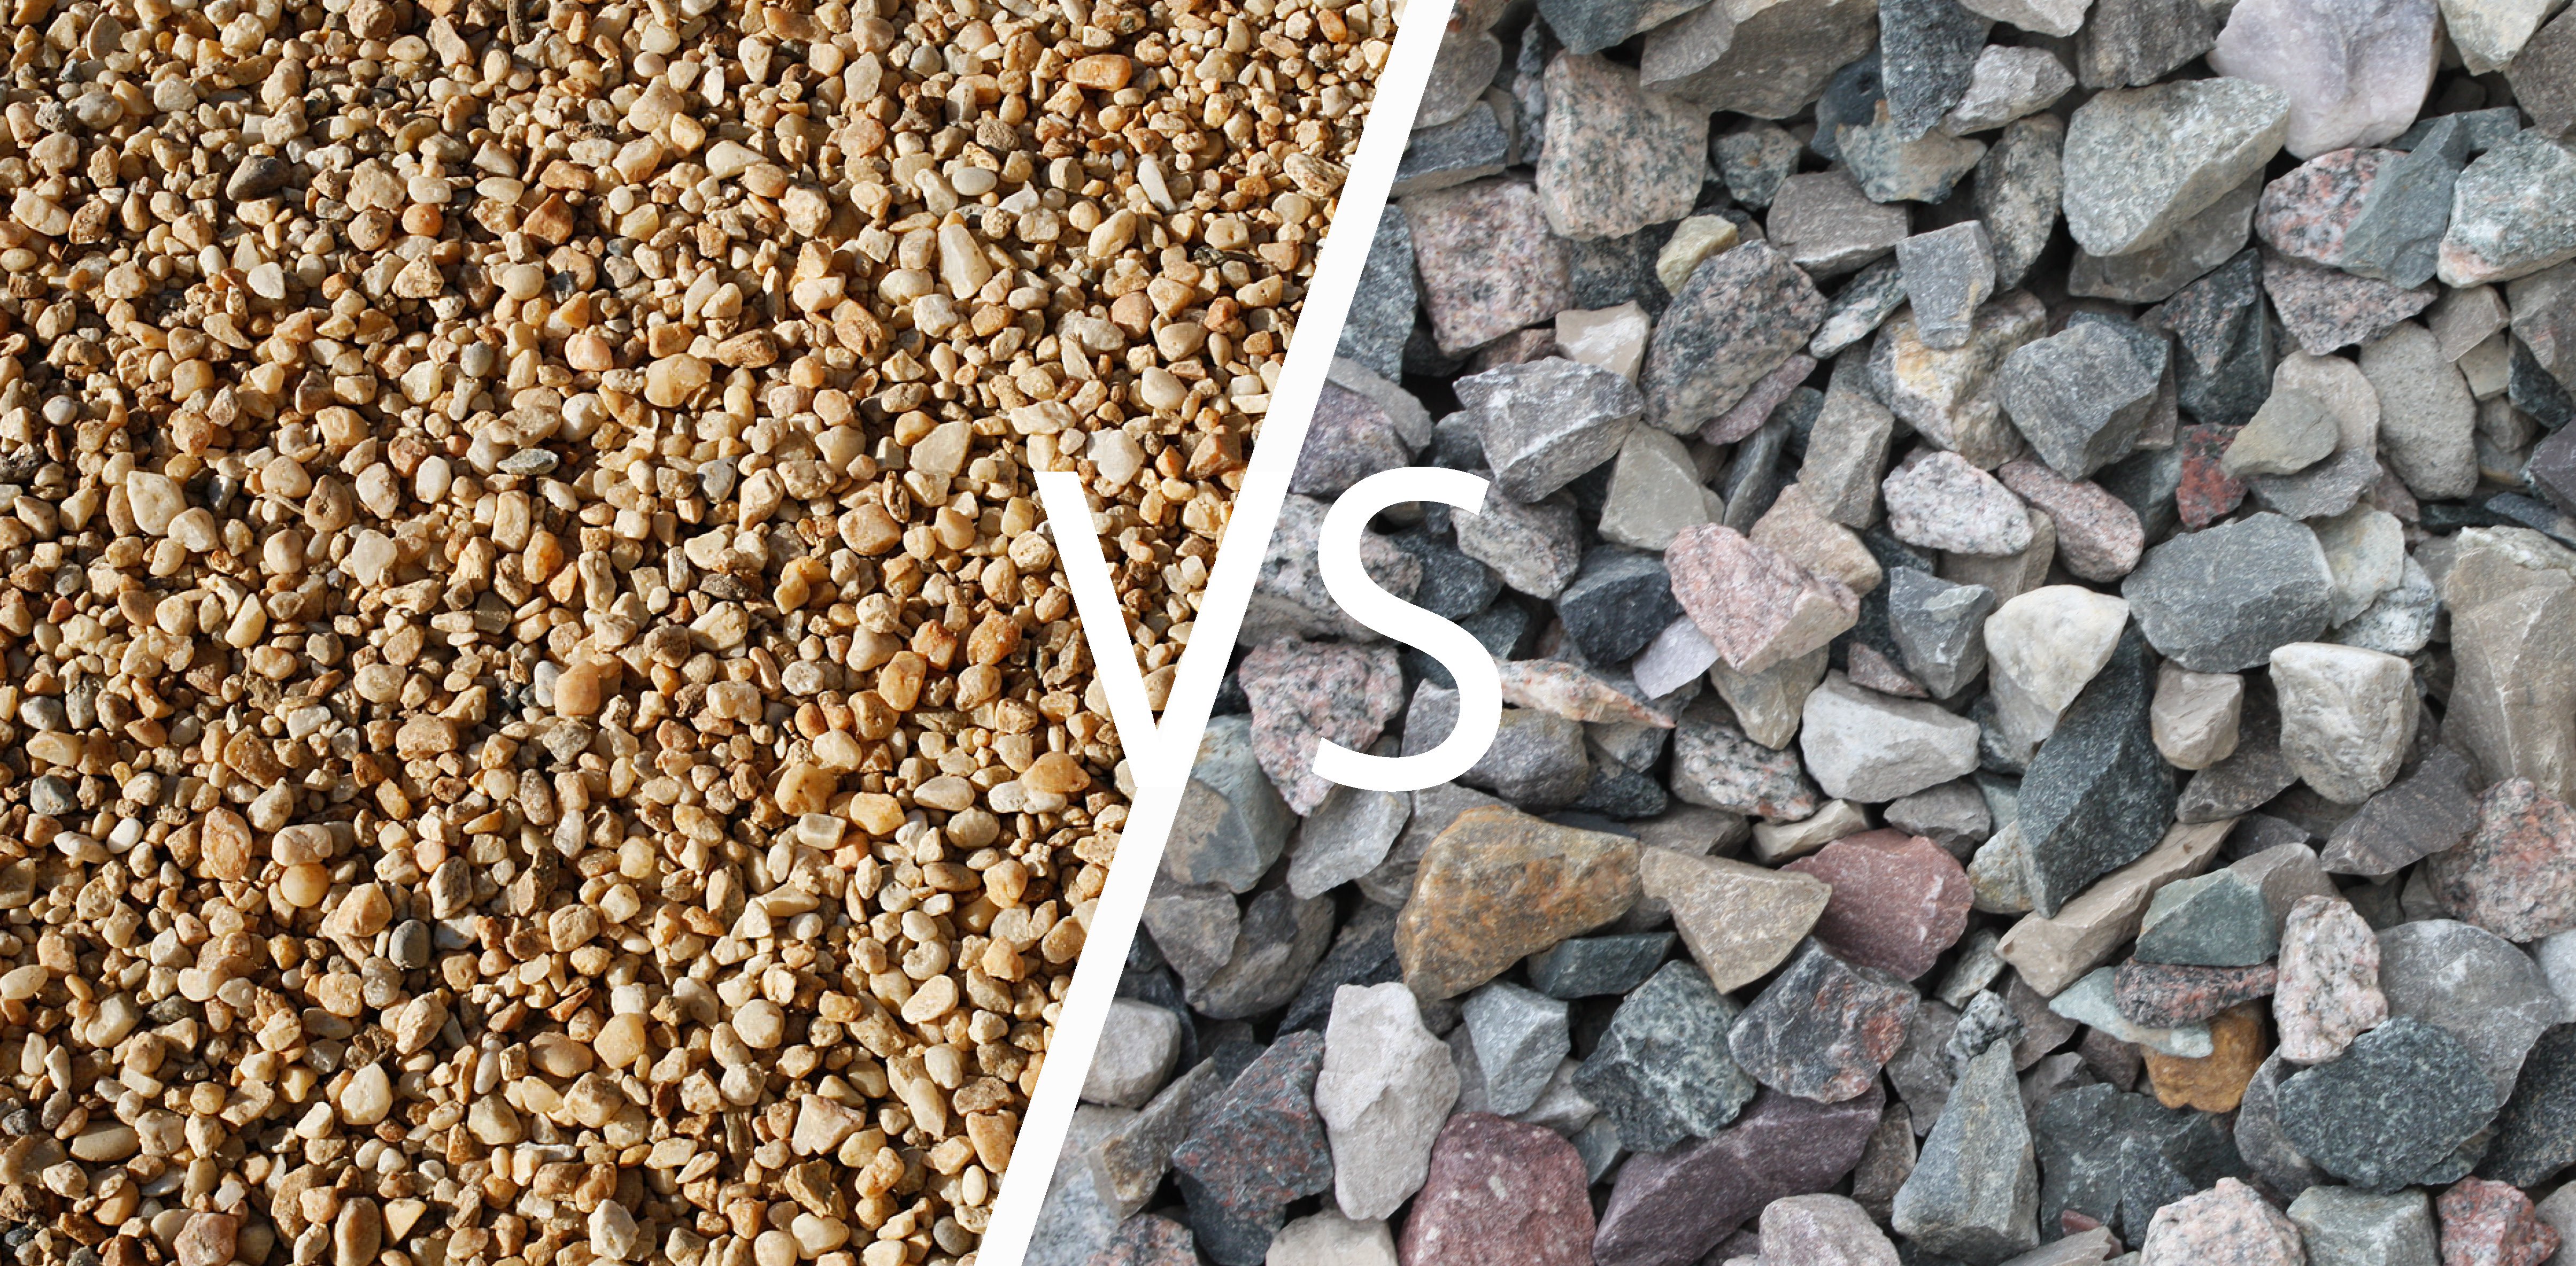 Crushed Stone vs. Pea Gravel: What's the Difference?